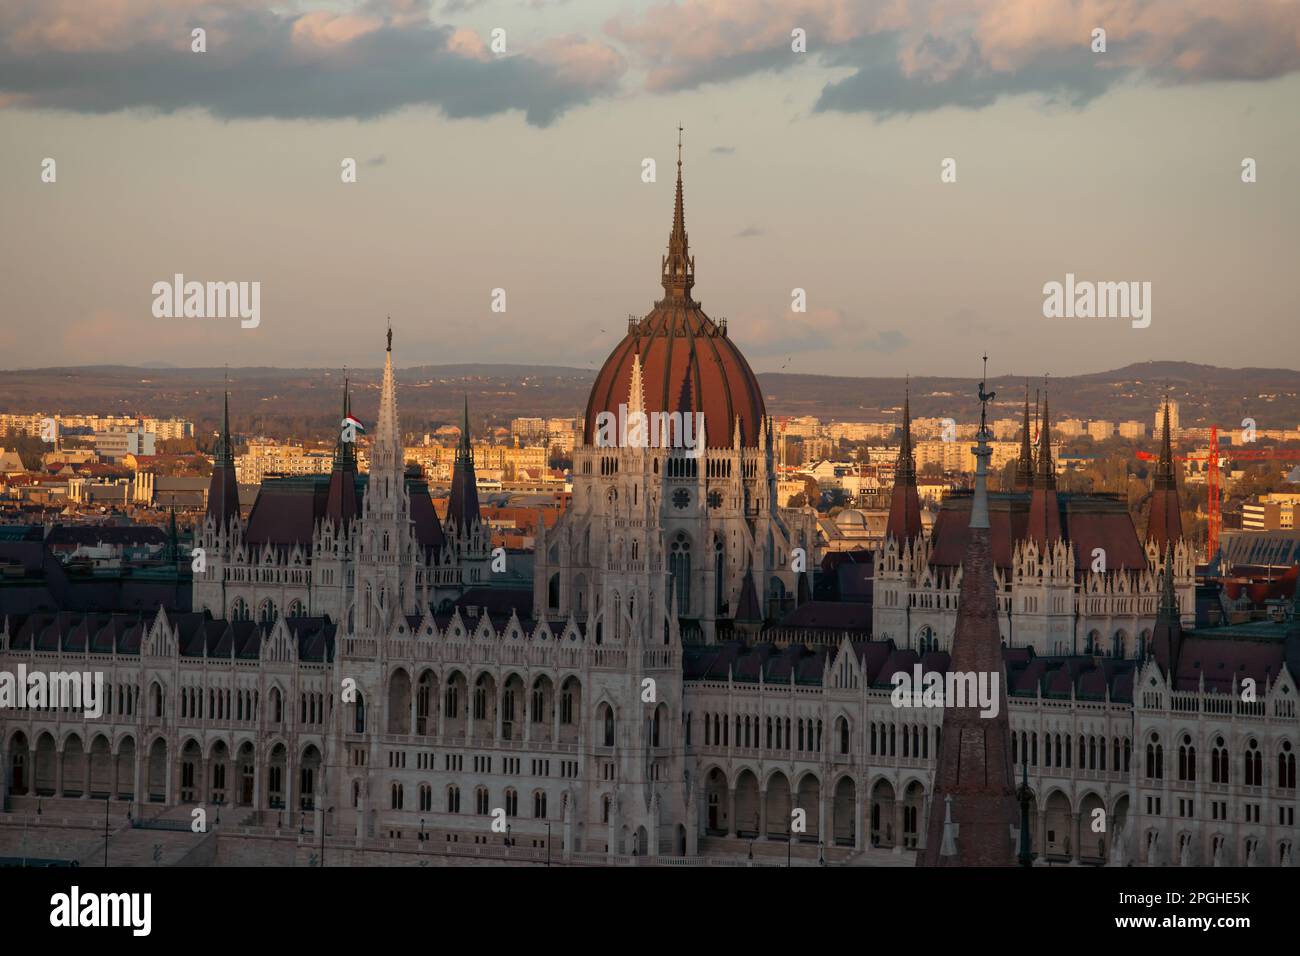 View of Budapest parliament at sunset, Hungary Stock Photo